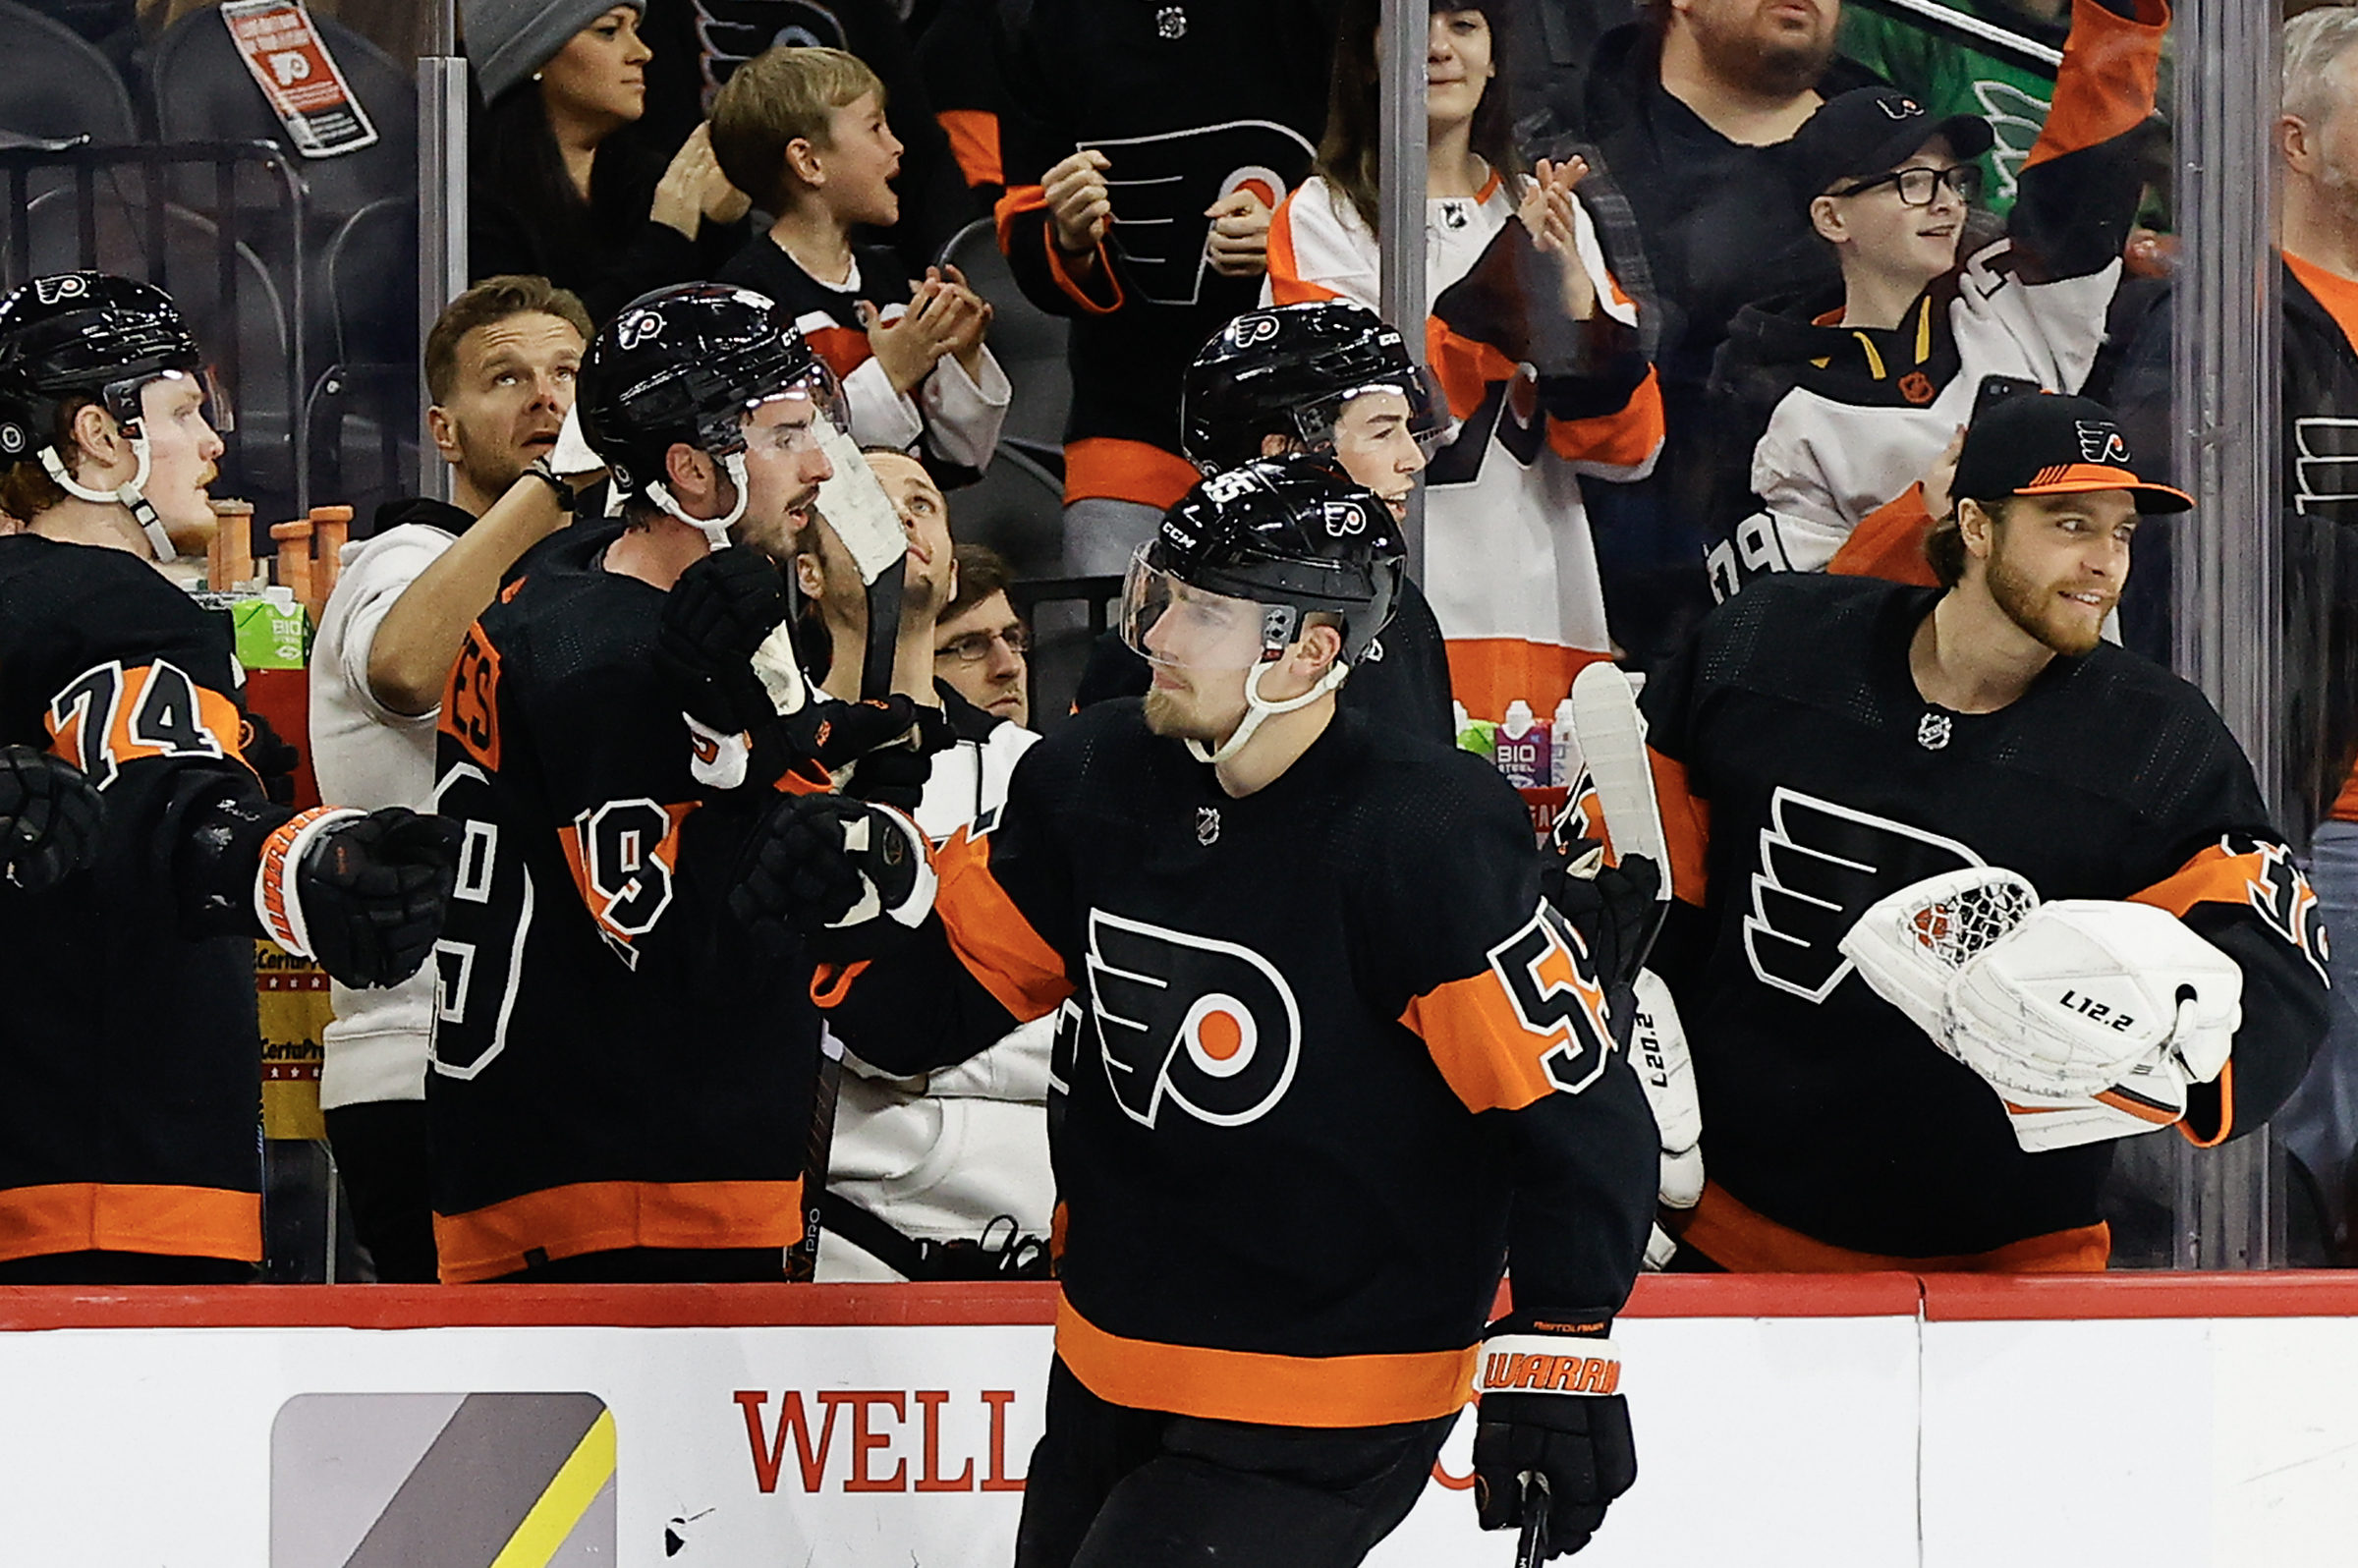 Flyers end road woes with shootout win in New Jersey – The Morning